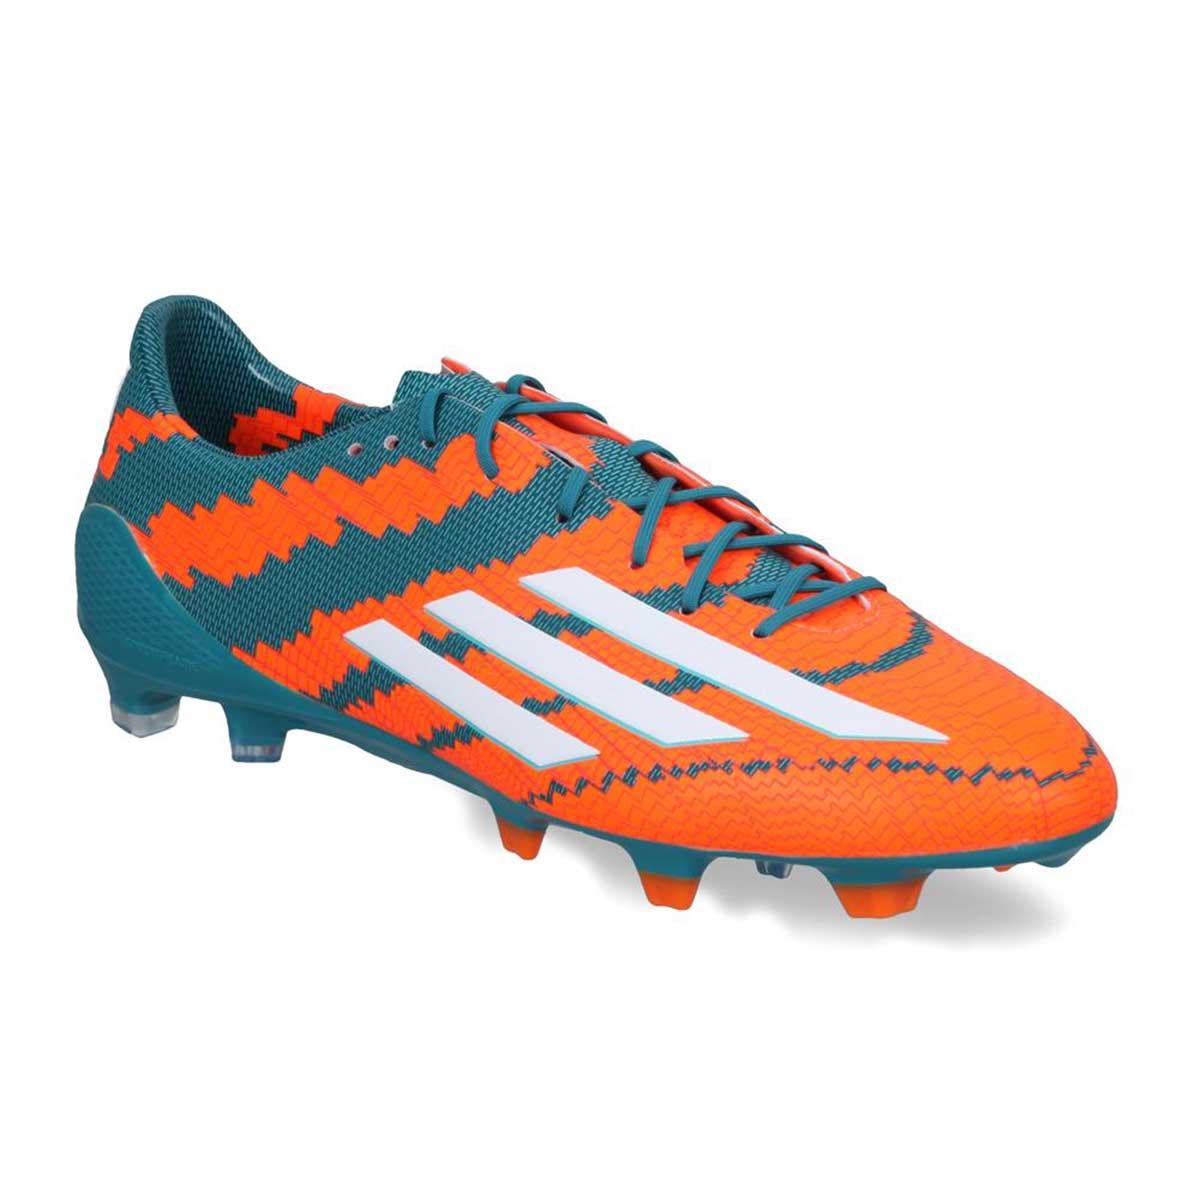 Buy Adidas Messi 10.1 FG Football Shoes Online India